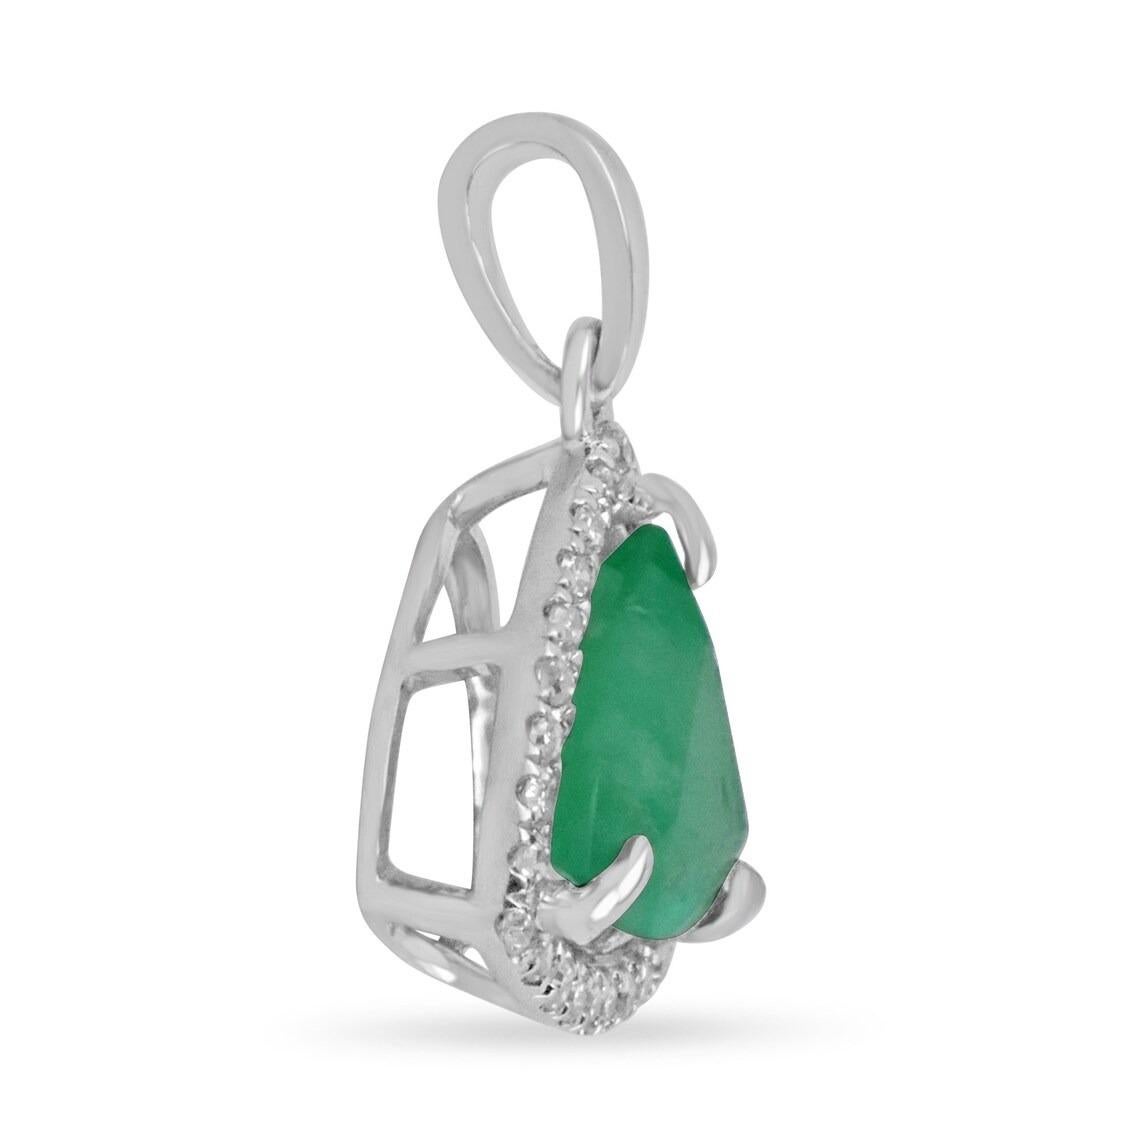 A one-of-a-kind, trillion-cut Colombian emerald & diamond halo solitaire pendant. A large 1.09-carat, earth-mined, trillion Colombian emeralds sits delicately in a diamond prong setting. A rare beauty in every aspect. Gorgeous, green color is evenly